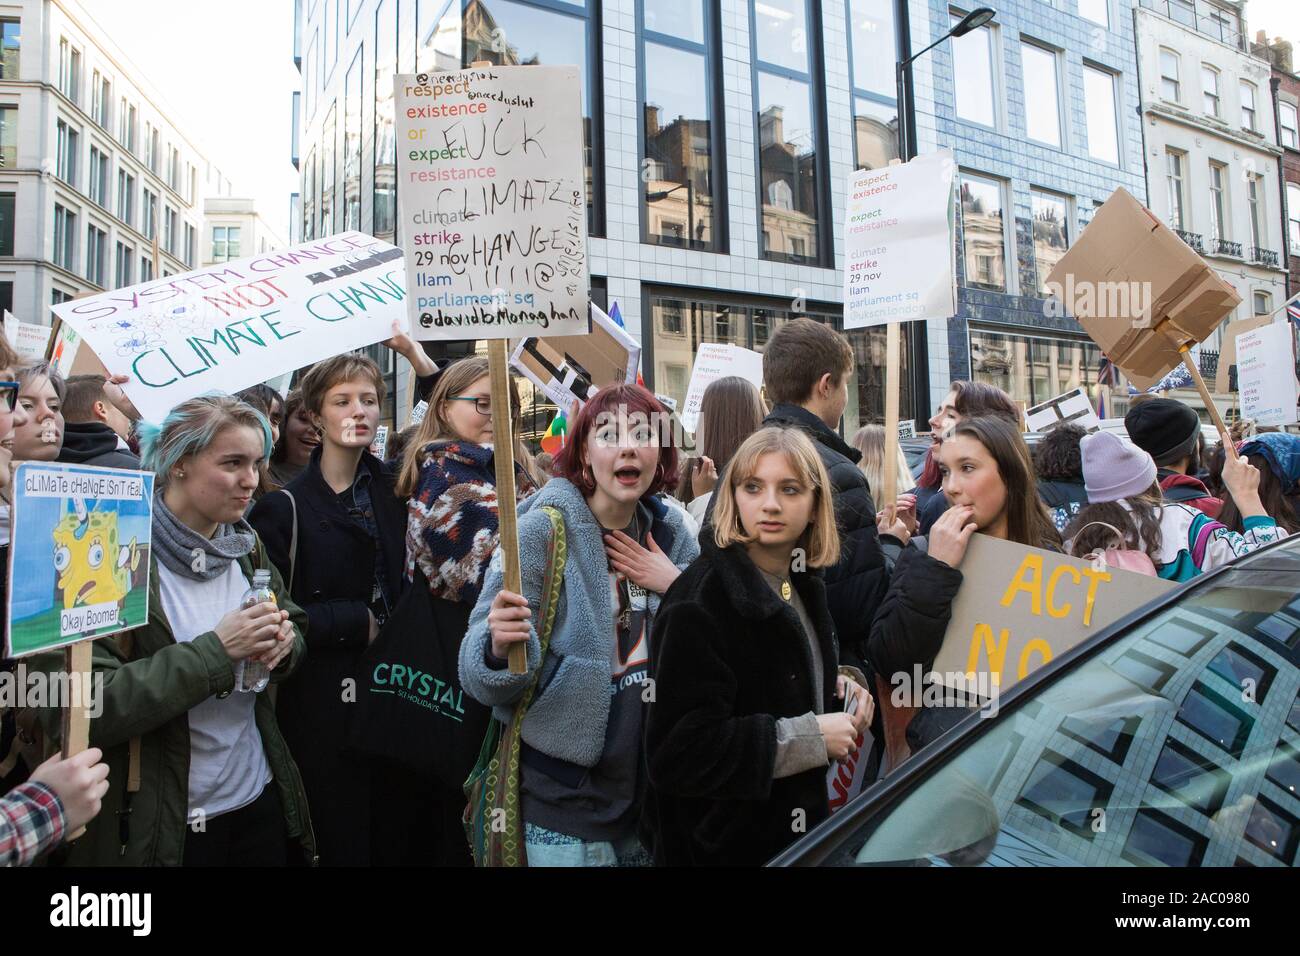 Westminster, London, UK. 29 November 2019. Hundreds of school children turn out for a global Climate Emergency Strike in London organised by the UK Student Climate Network. Police diverts the protesters in Regent Street to prevent them reaching Oxford Circus. Stock Photo